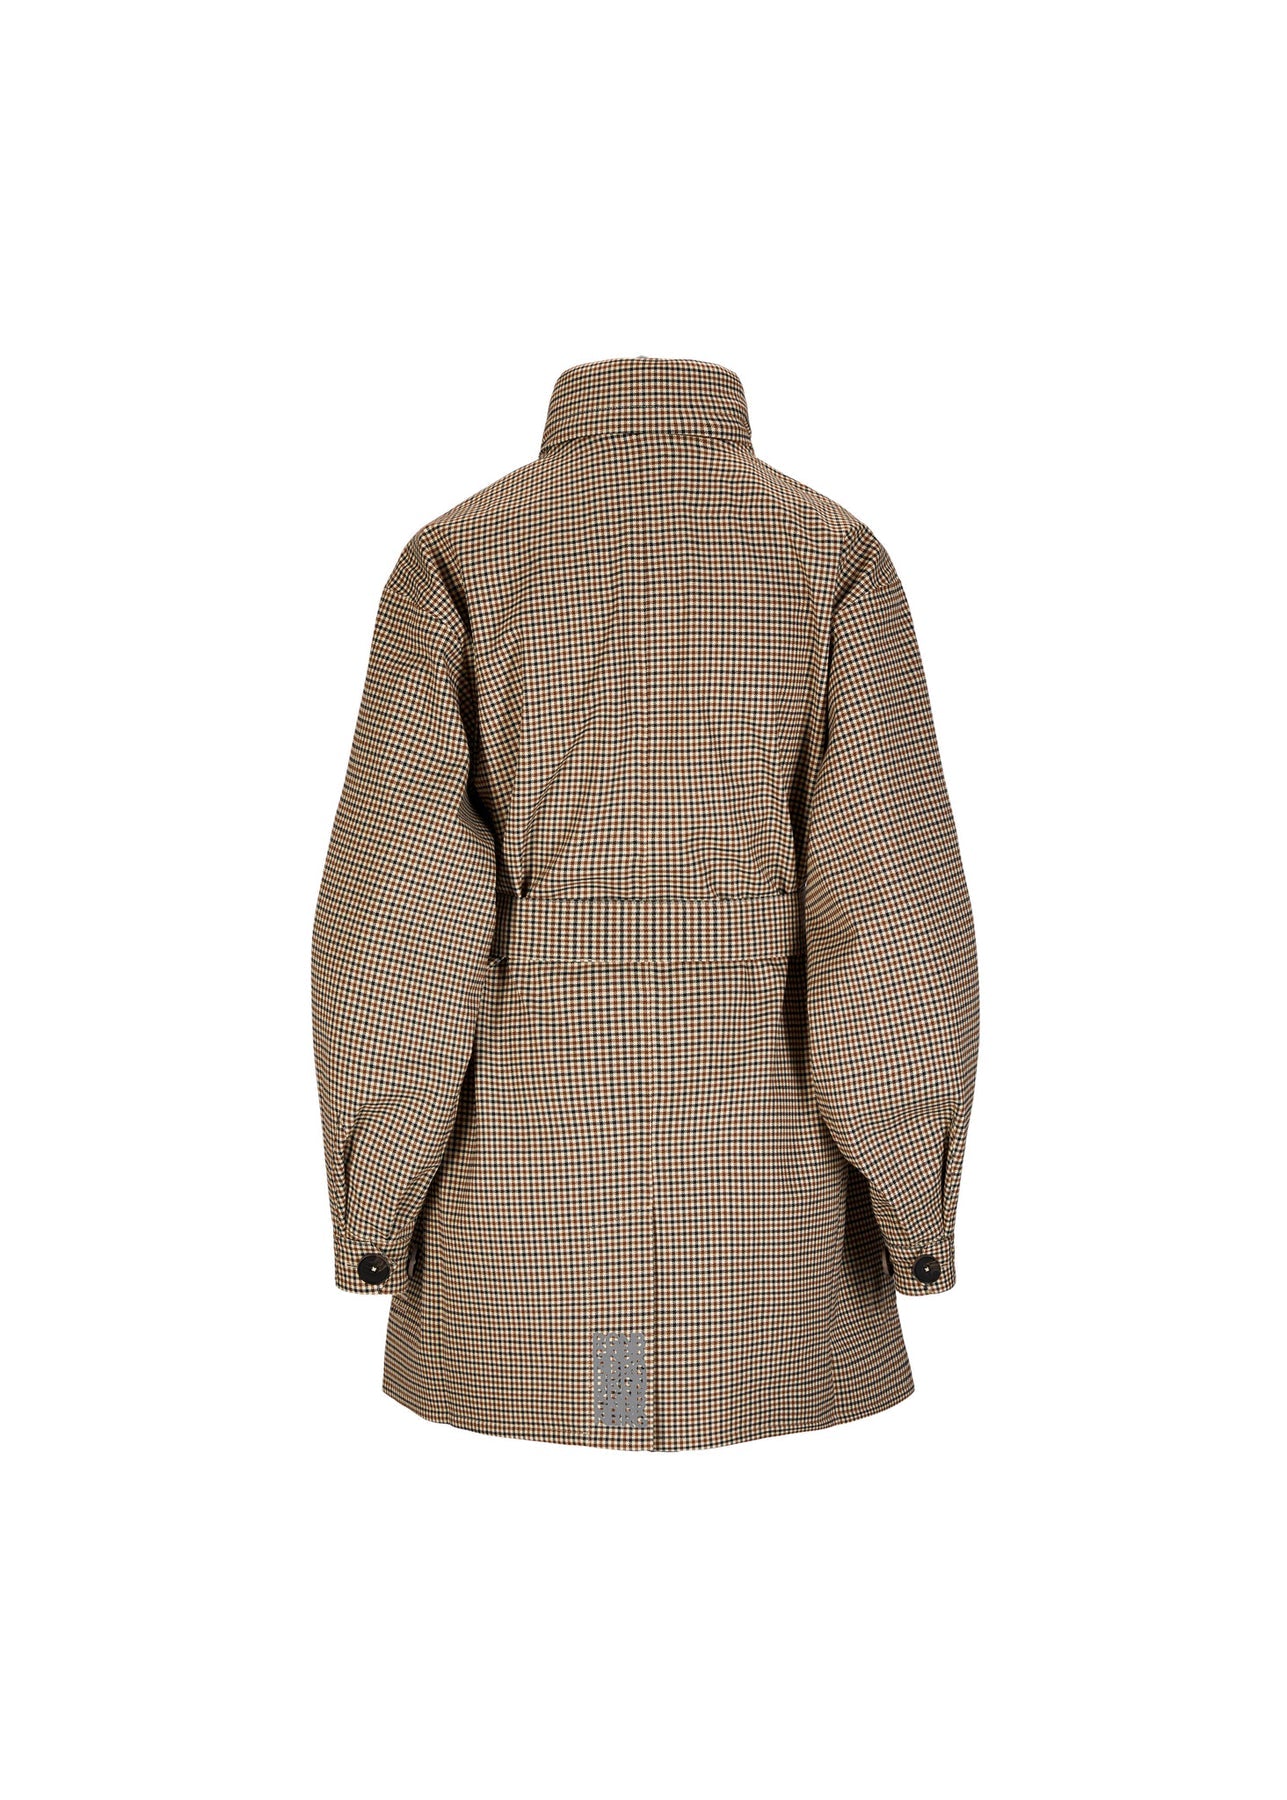 BRGN ROSBY STRAIGHT COAT 124